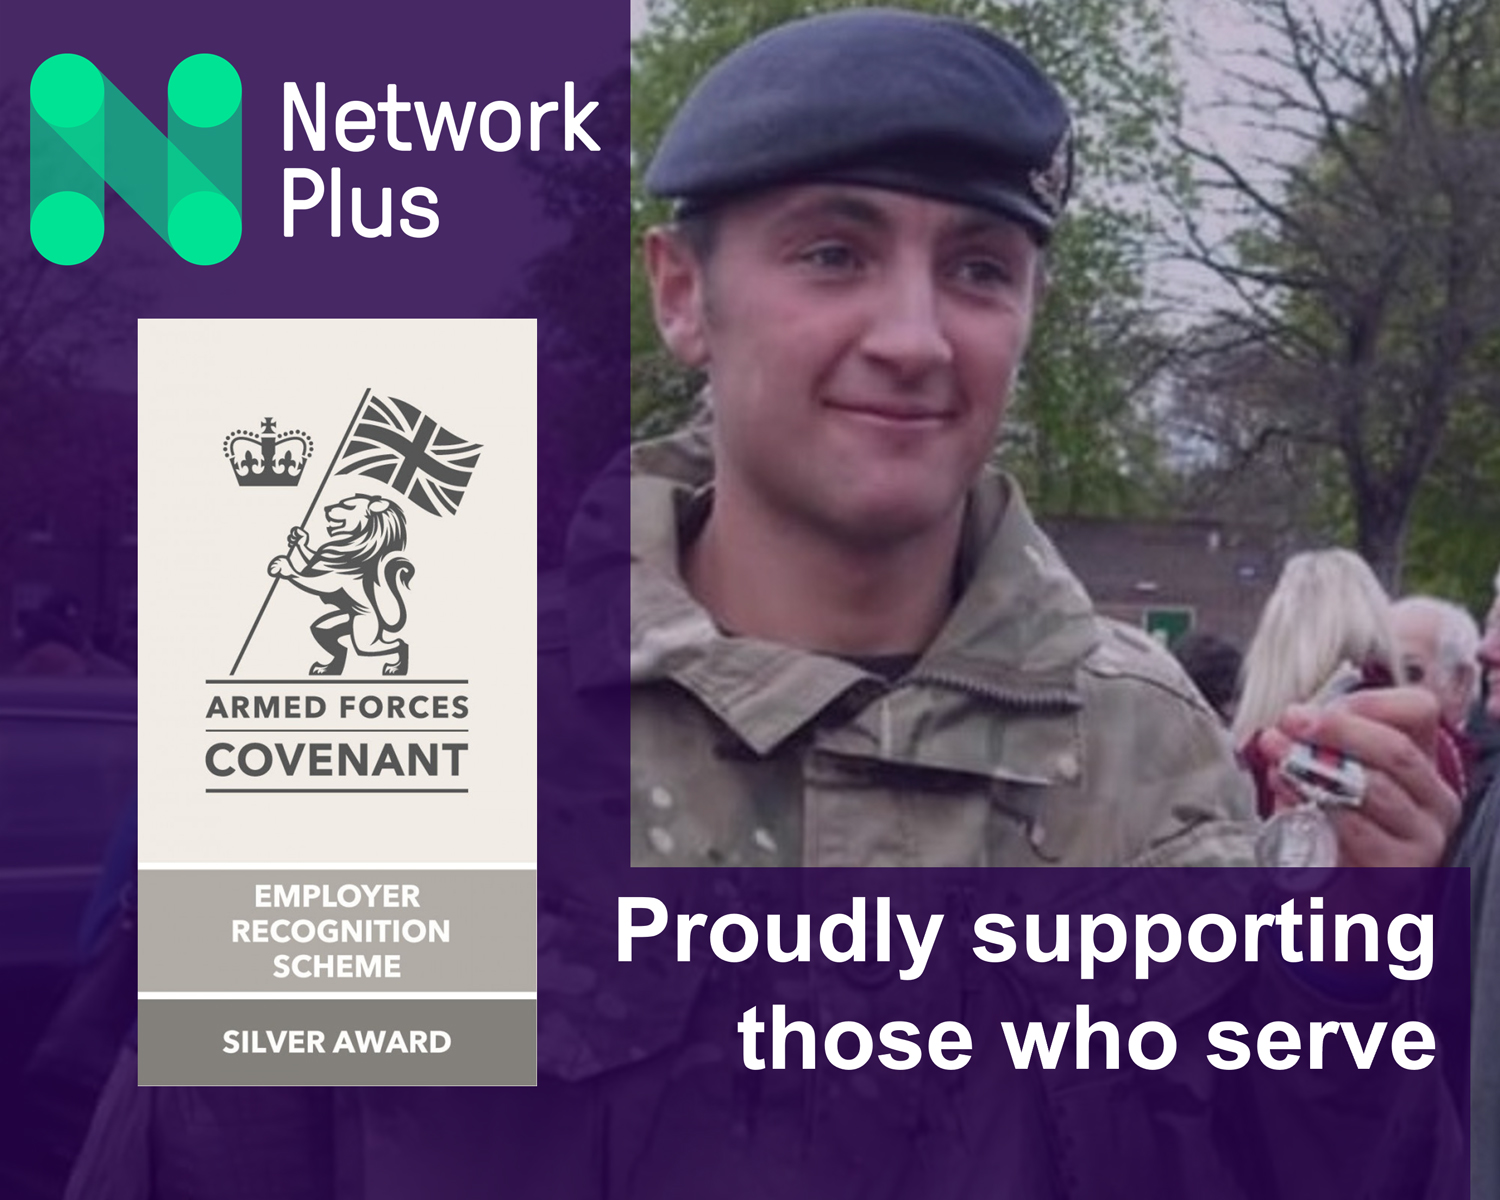 Network Plus has been awarded silver on the Ministry of Defence’s Employer Recognition Scheme, acknowledging its outstanding support for the Armed forces community